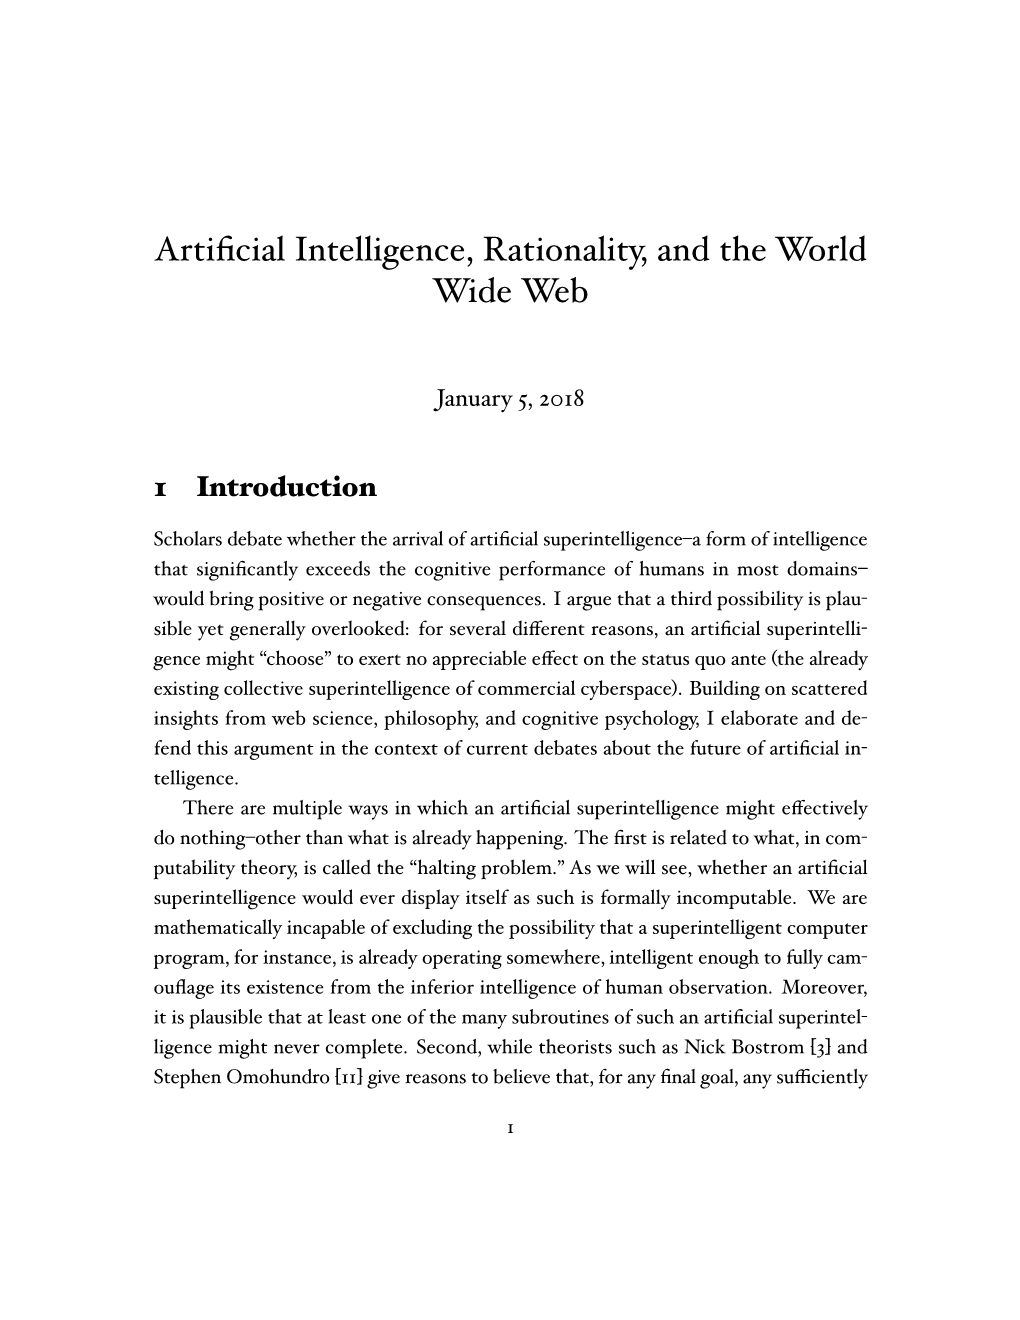 Artificial Intelligence, Rationality, and the World Wide